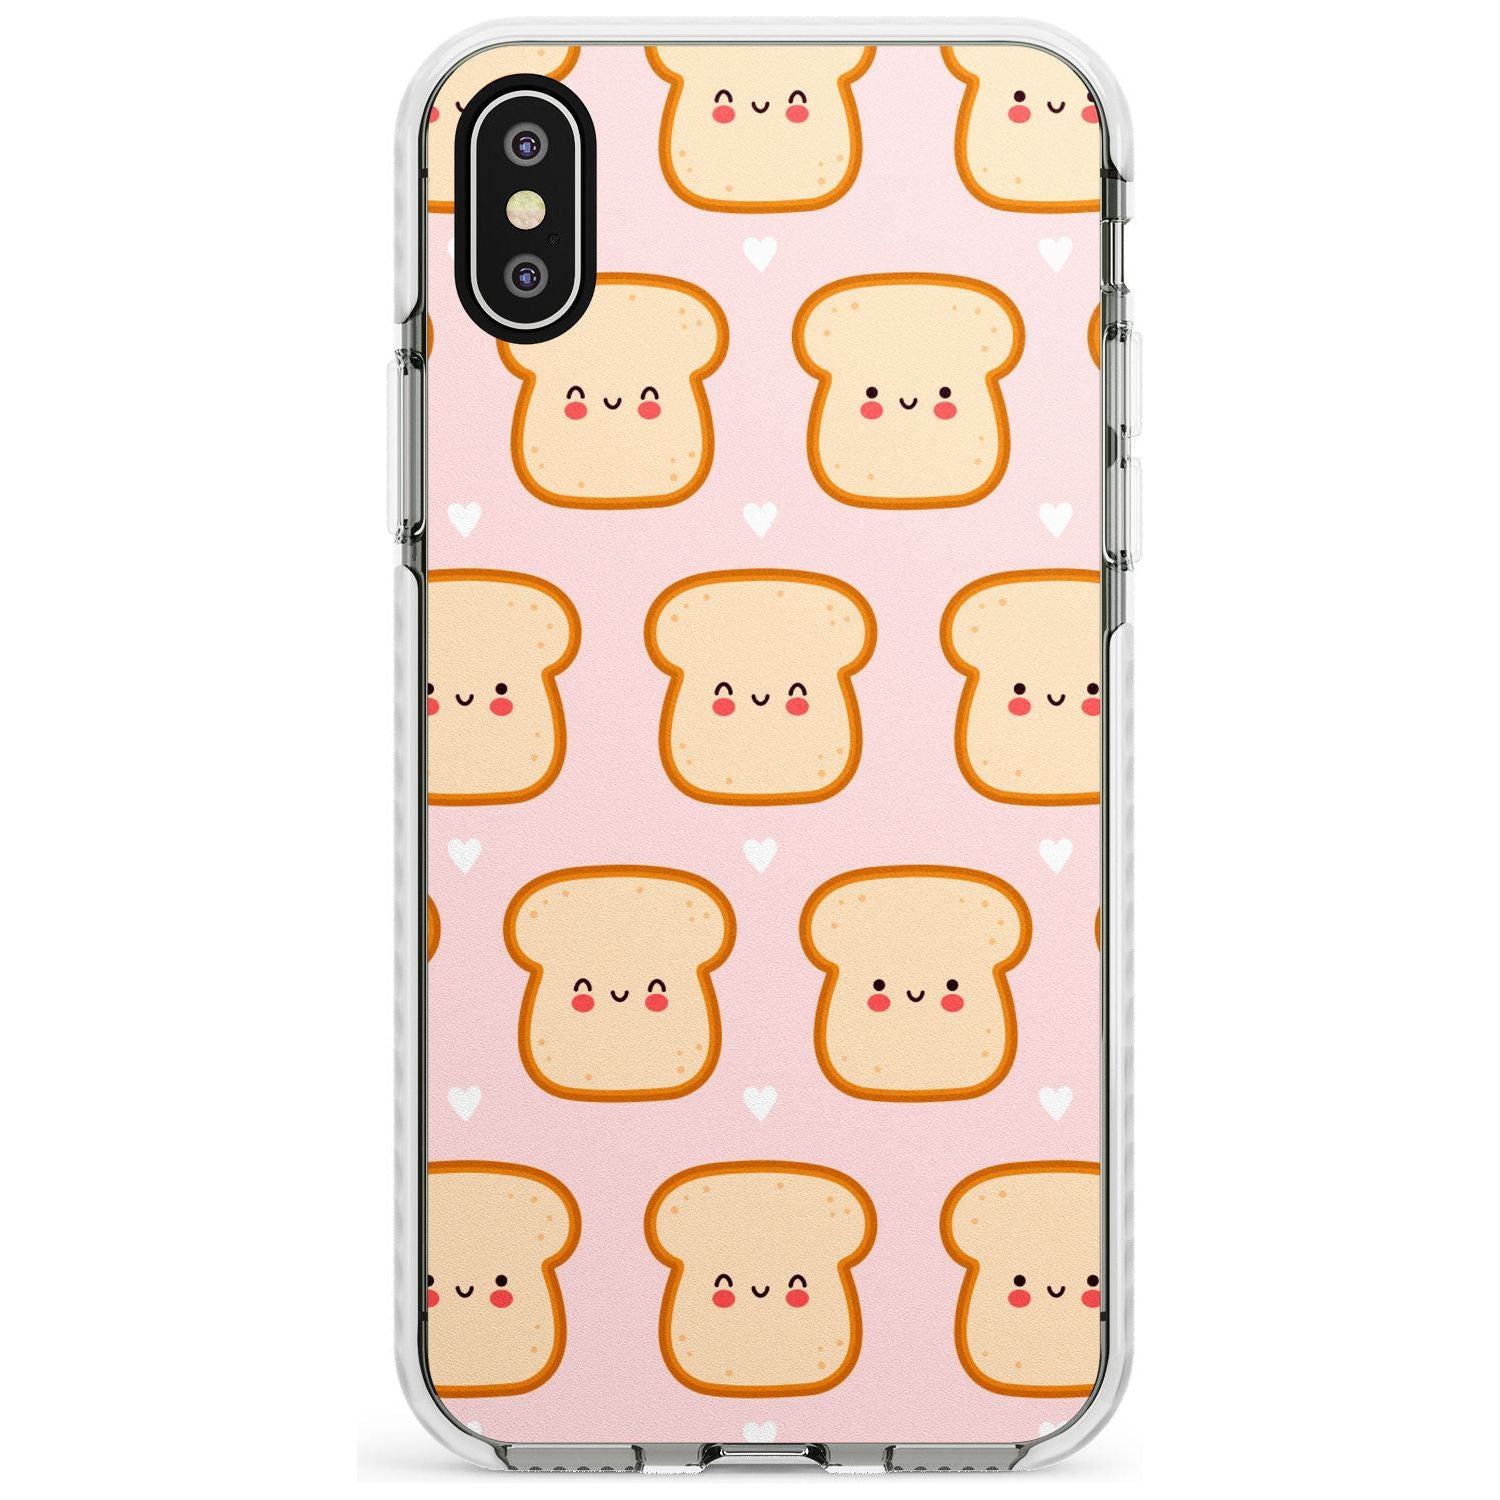 Bread Faces Kawaii Pattern Impact Phone Case for iPhone X XS Max XR